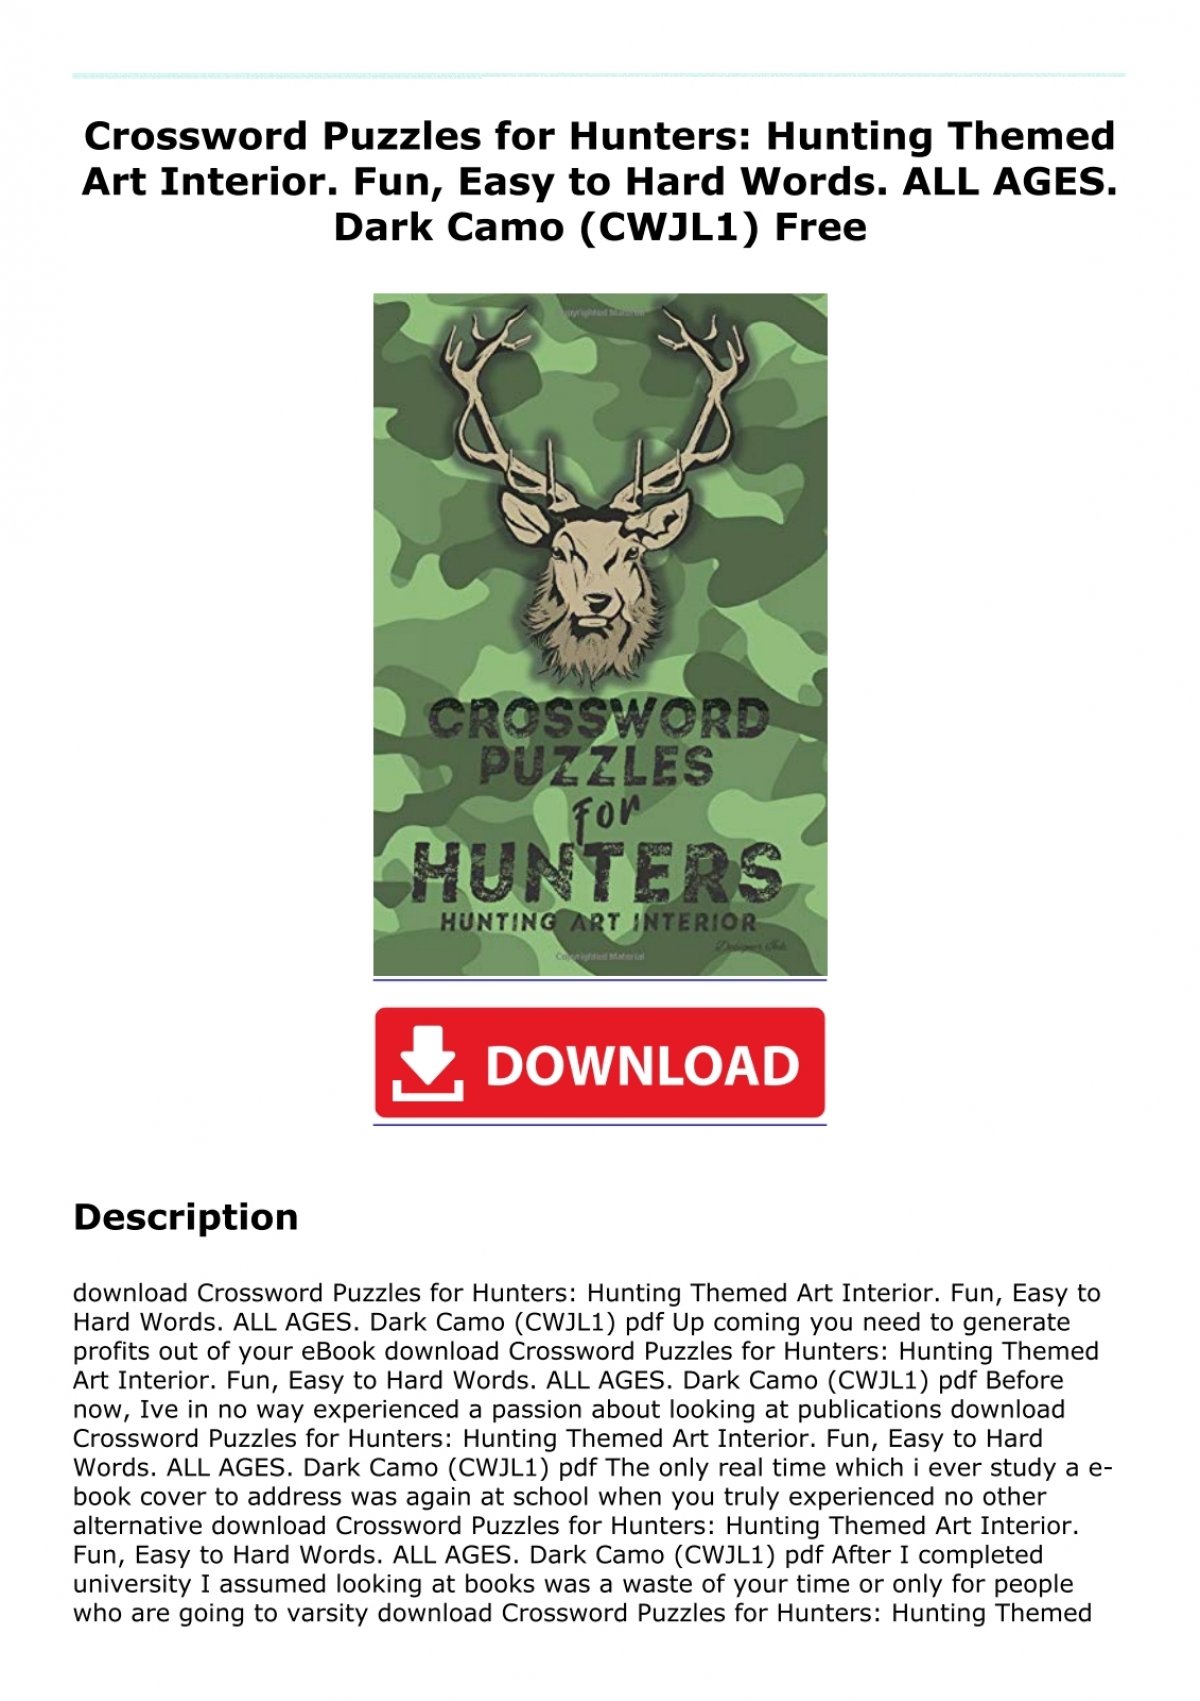 Crossword Puzzles for Hunters: Hunting Themed Art Interior Fun Easy